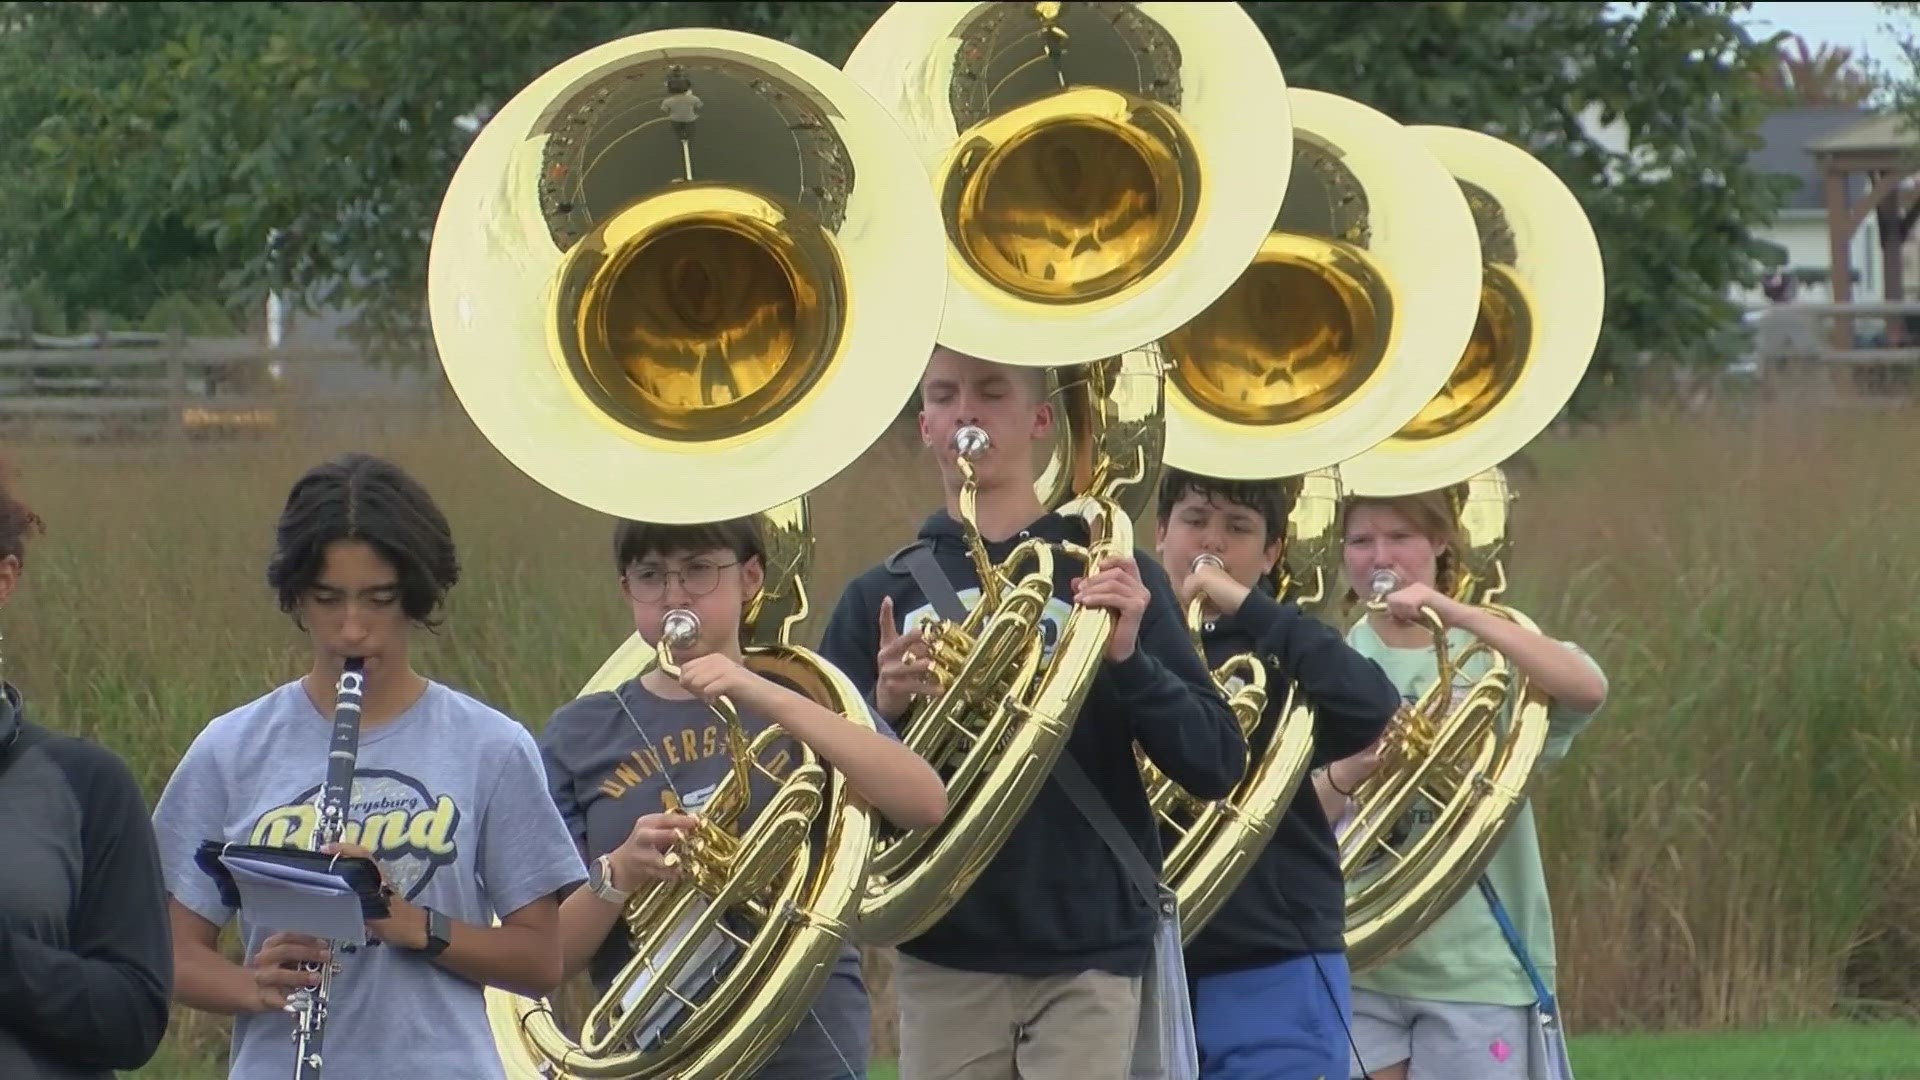 The Yellow Jackets marching band is considered the 'Pride of Perrysburg' and has nearly 200 members
who will perform a Crystal Concert...three times in December.